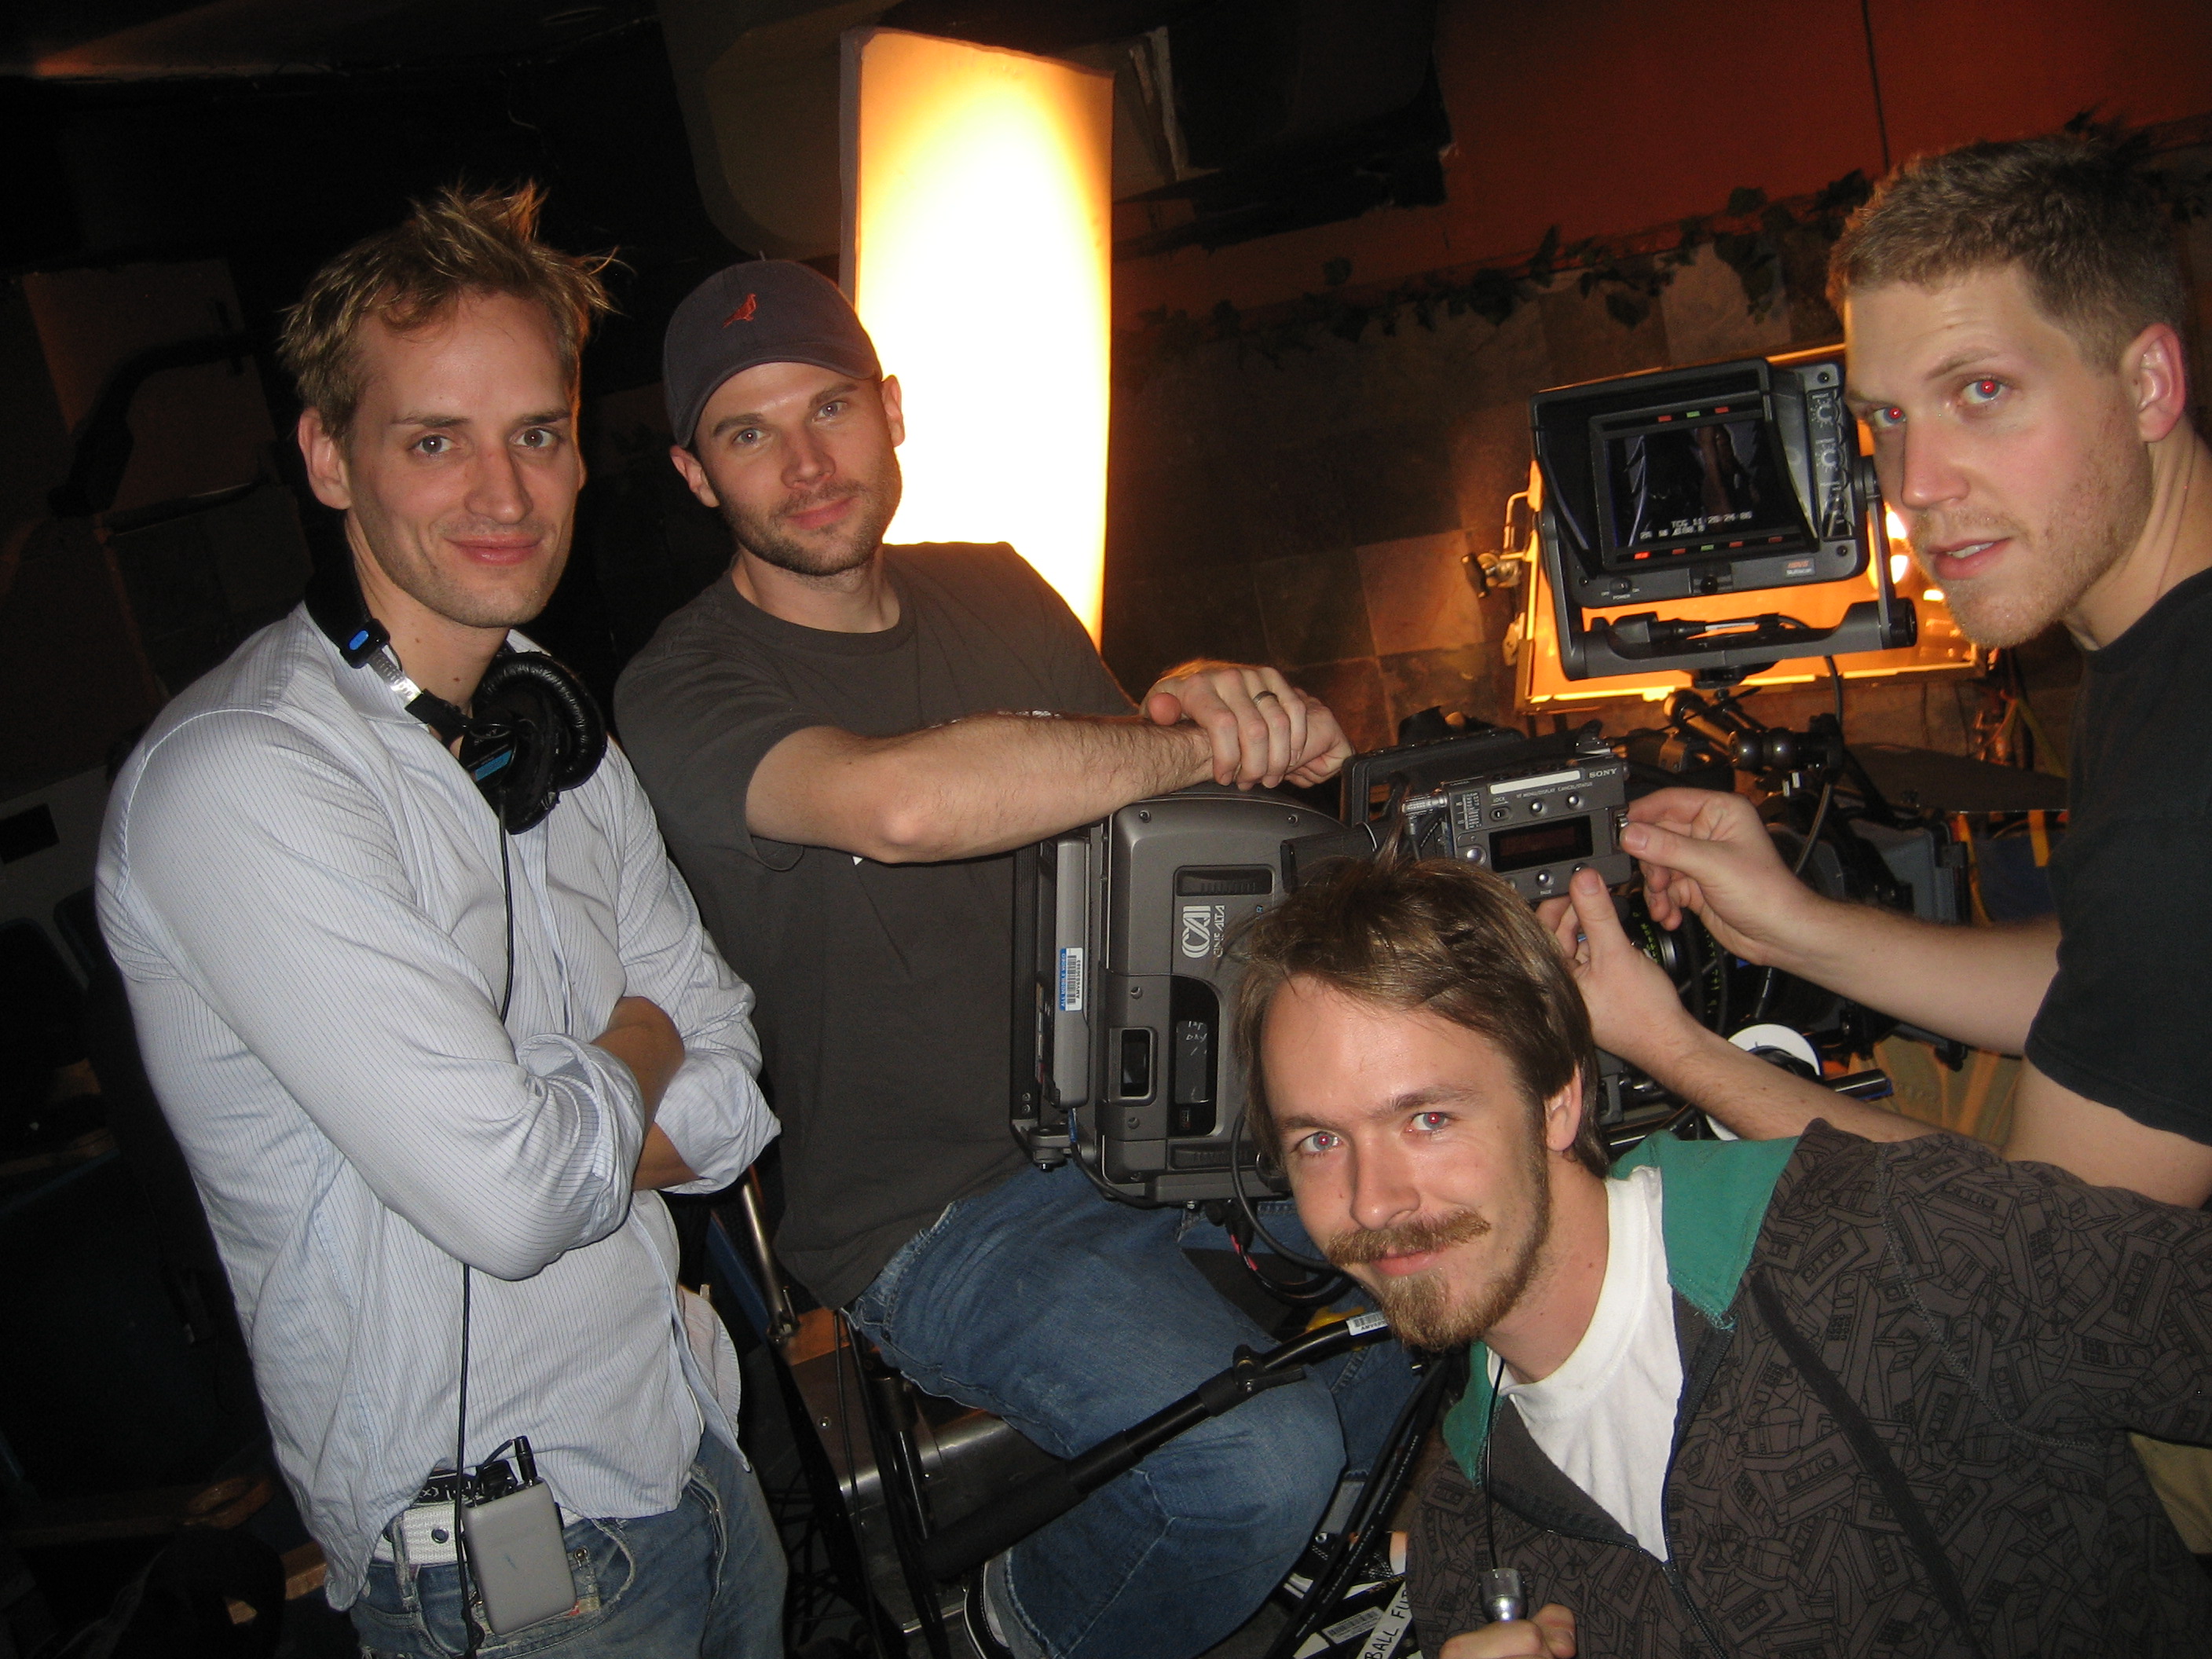 Director Casper Andreas and crew during the shooting of 